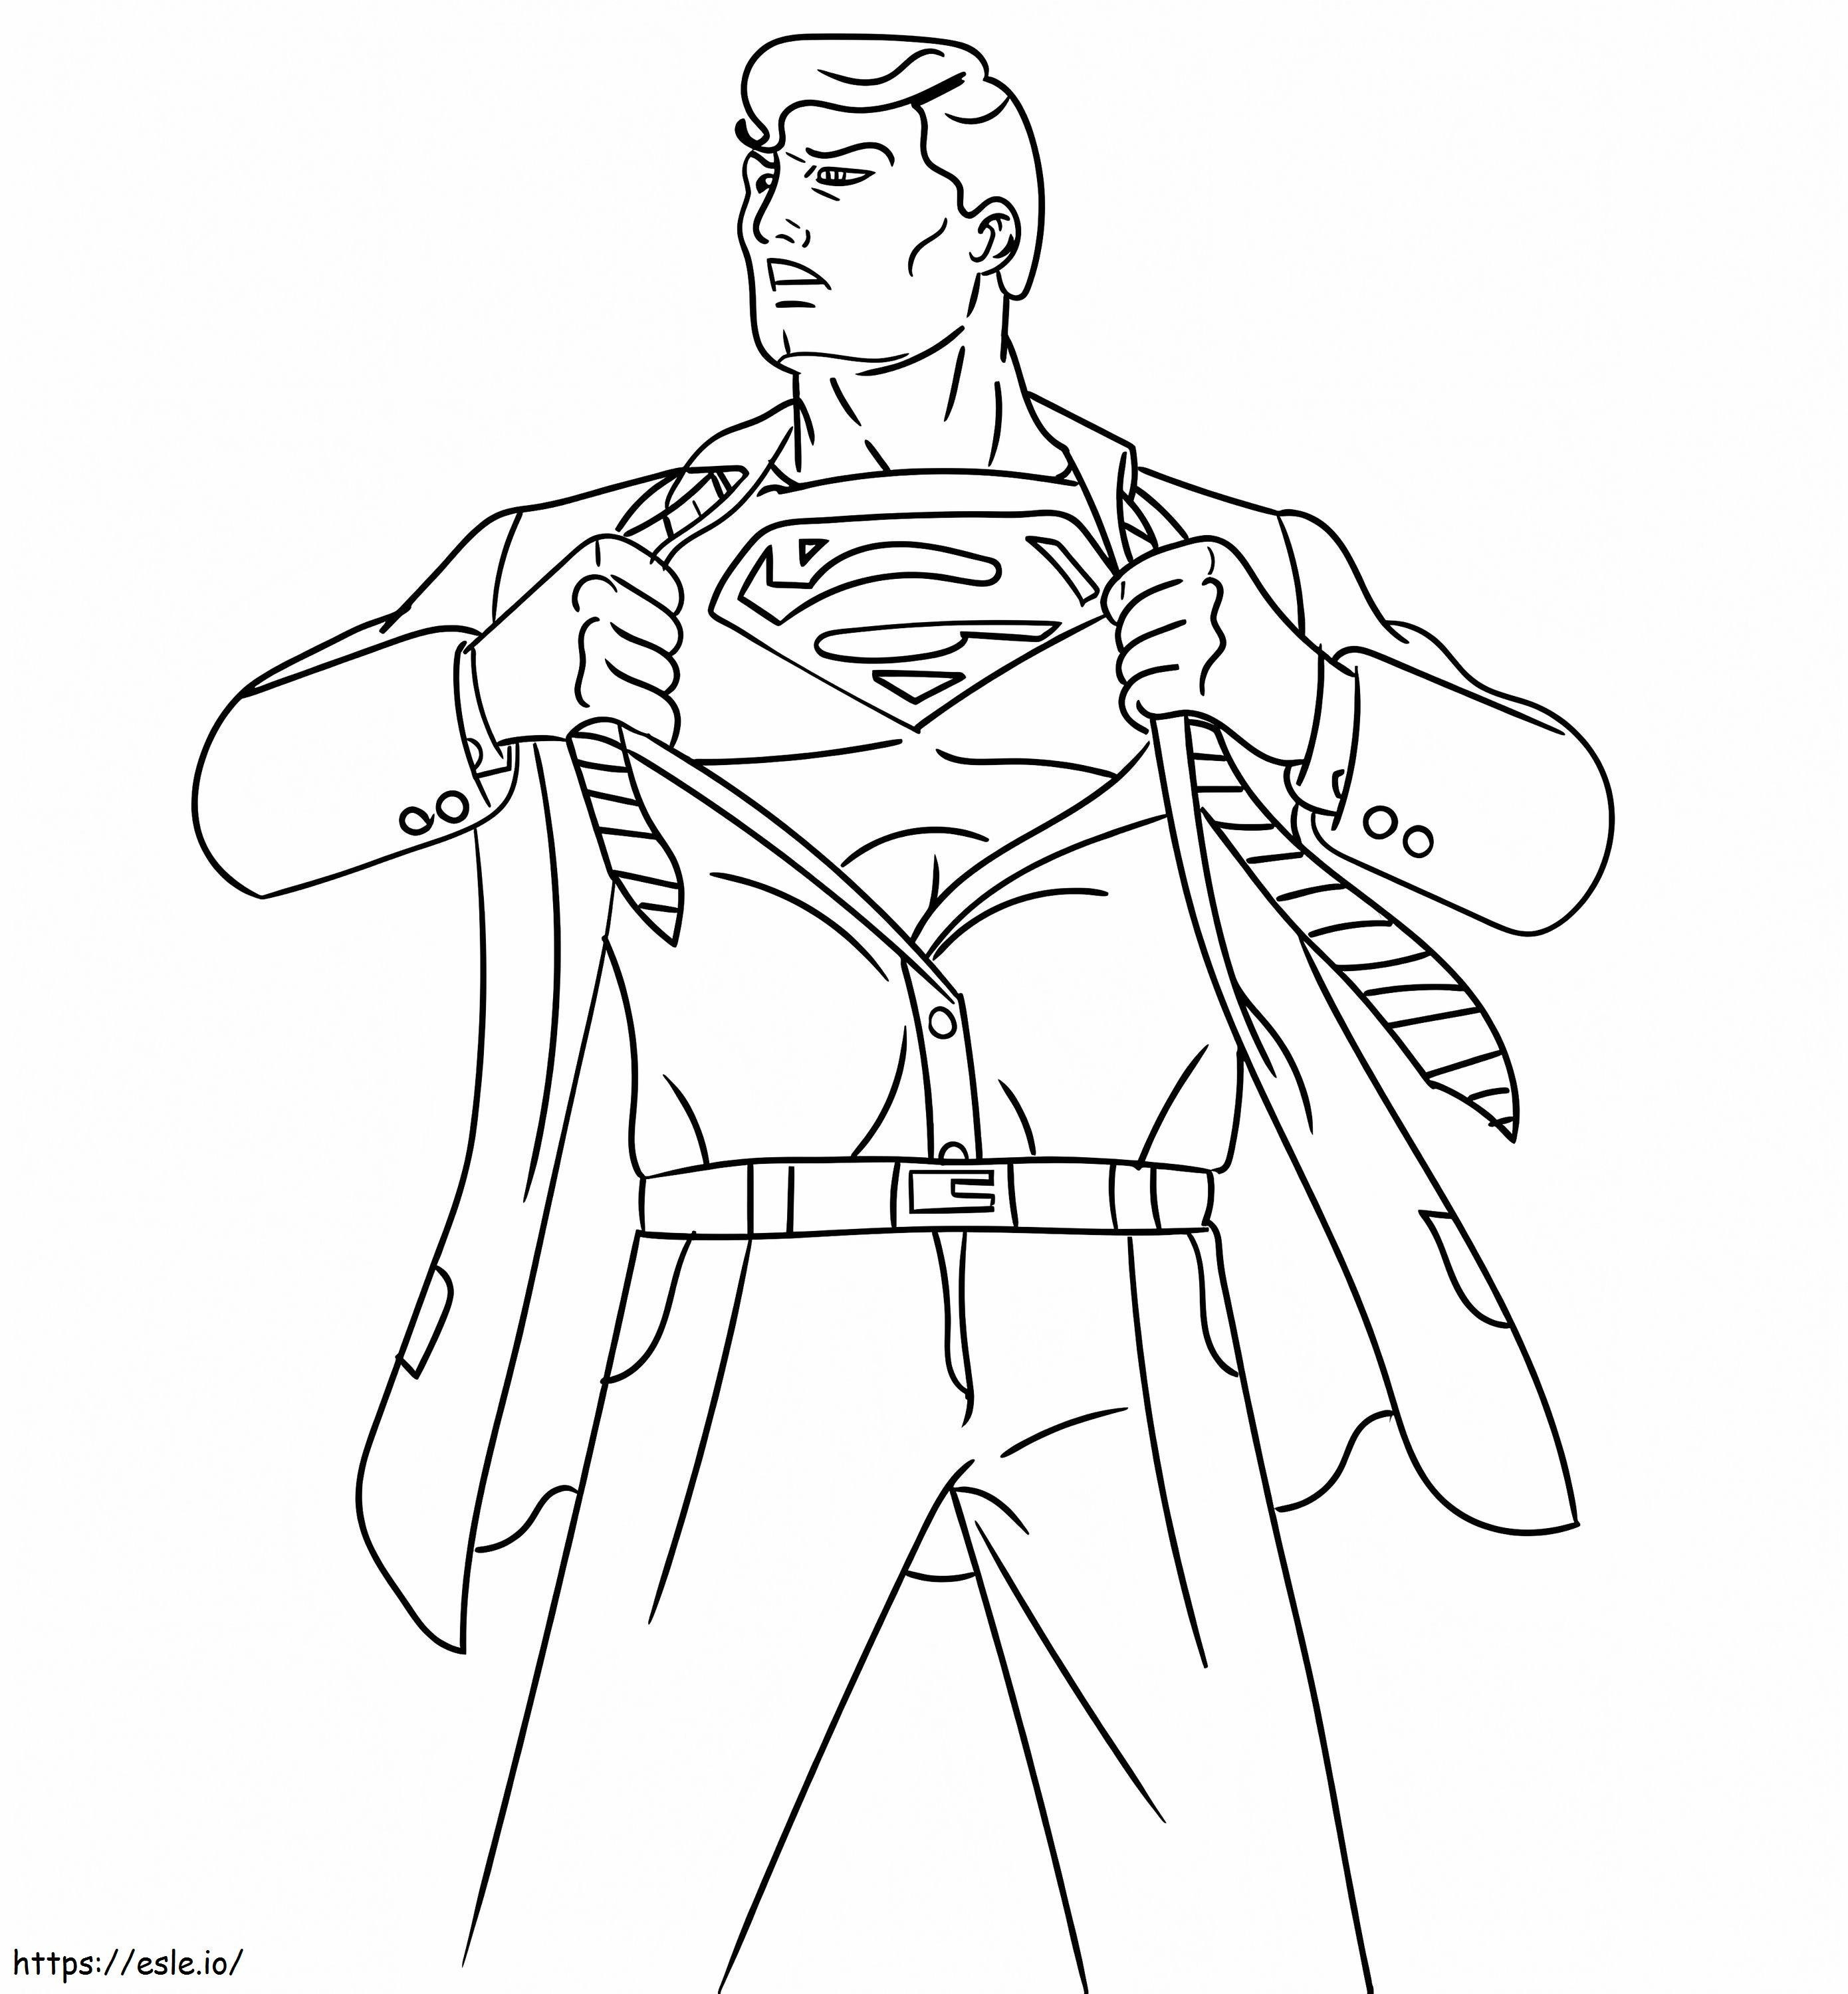 Genial Superman coloring page